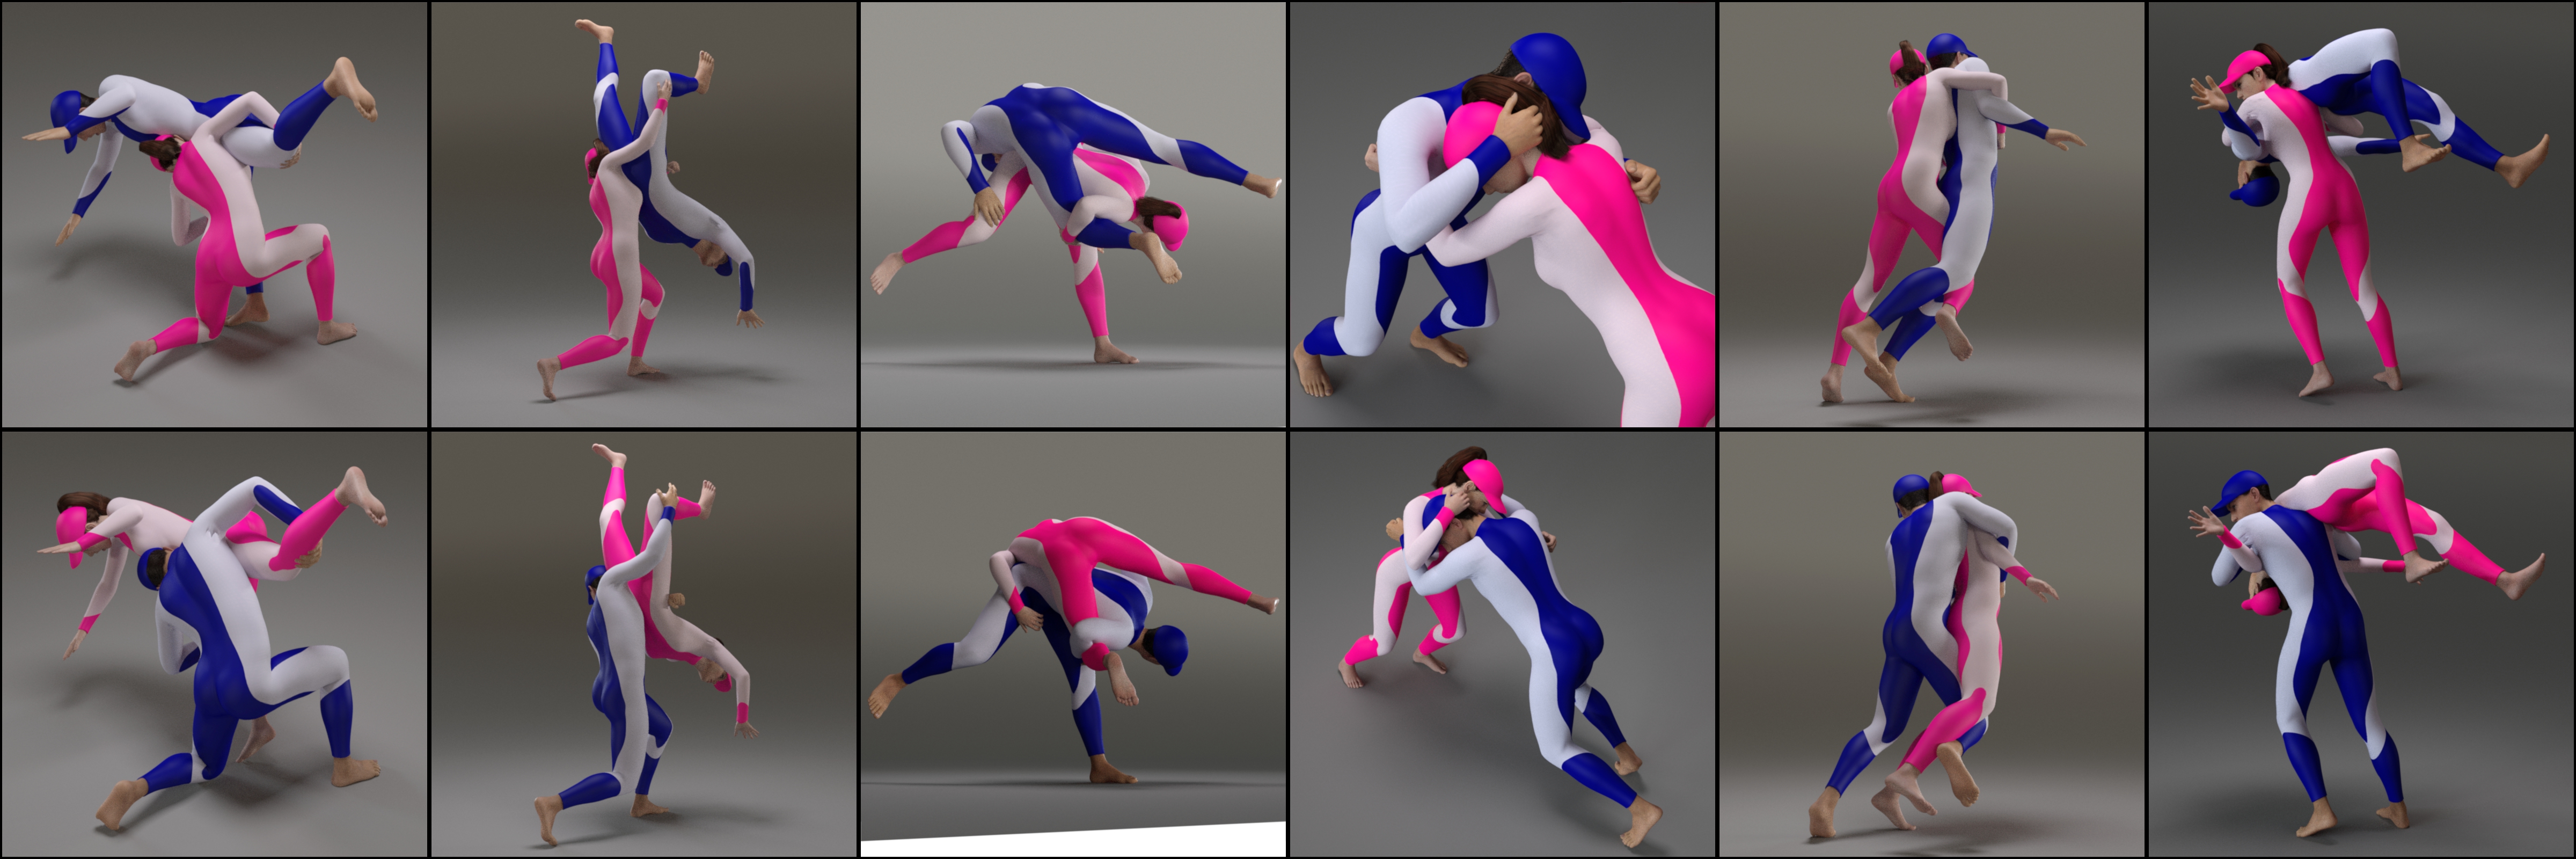 Grappling Poses Volume 6 for Genesis 8 and 8.1 by: atrilliongames, 3D Models by Daz 3D